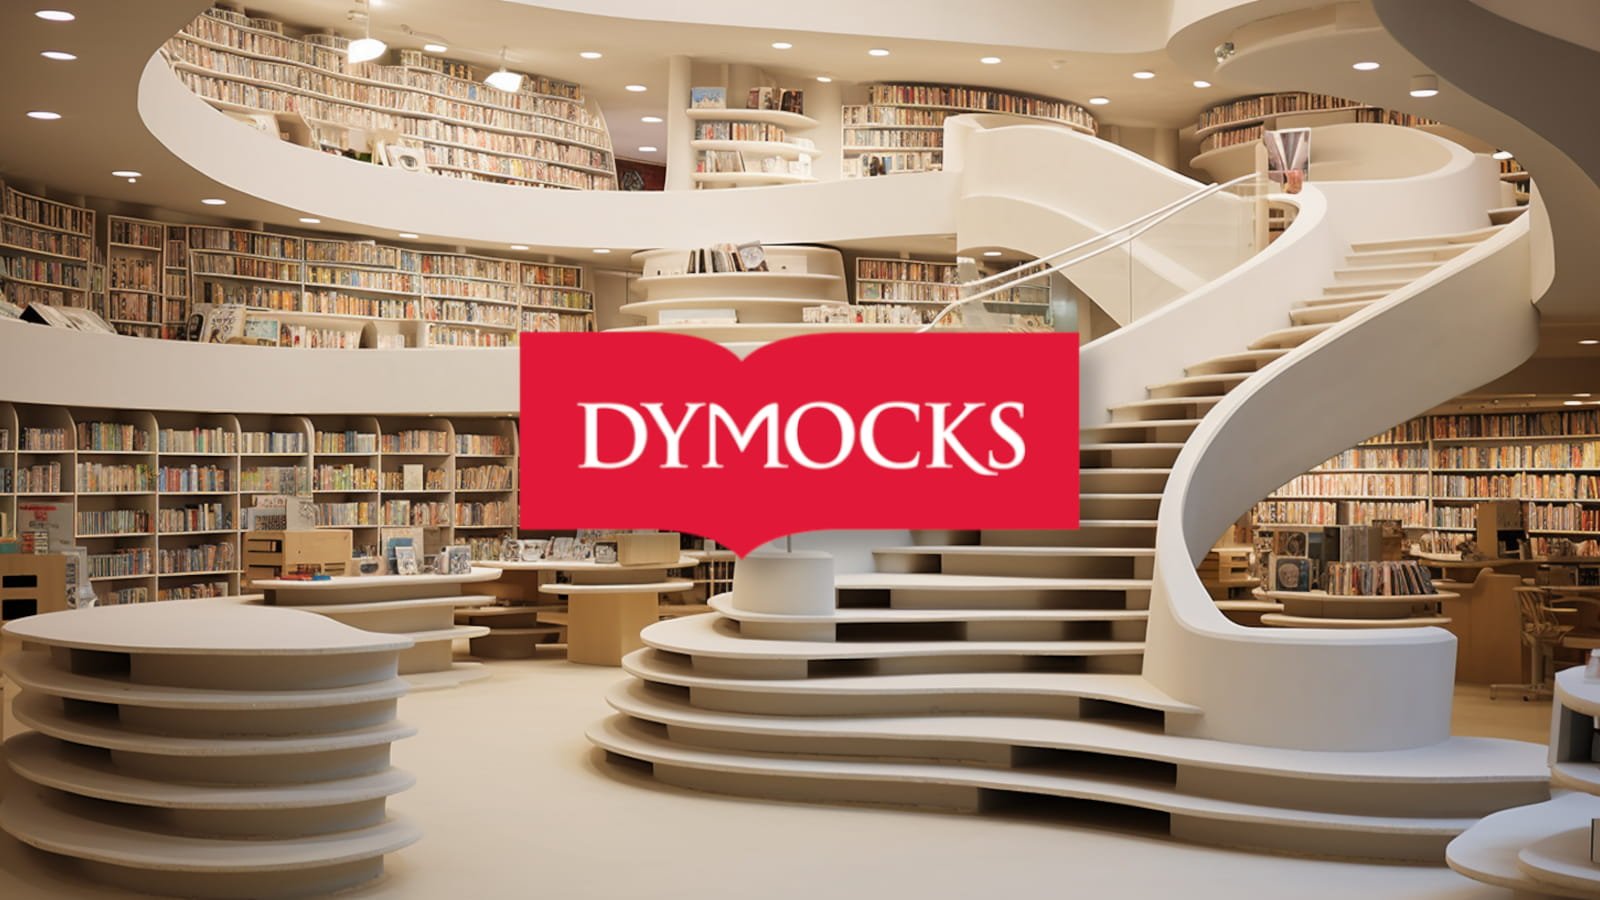 Dymocks, a library with a staircase, experiences a data breach putting 836k customers at risk.